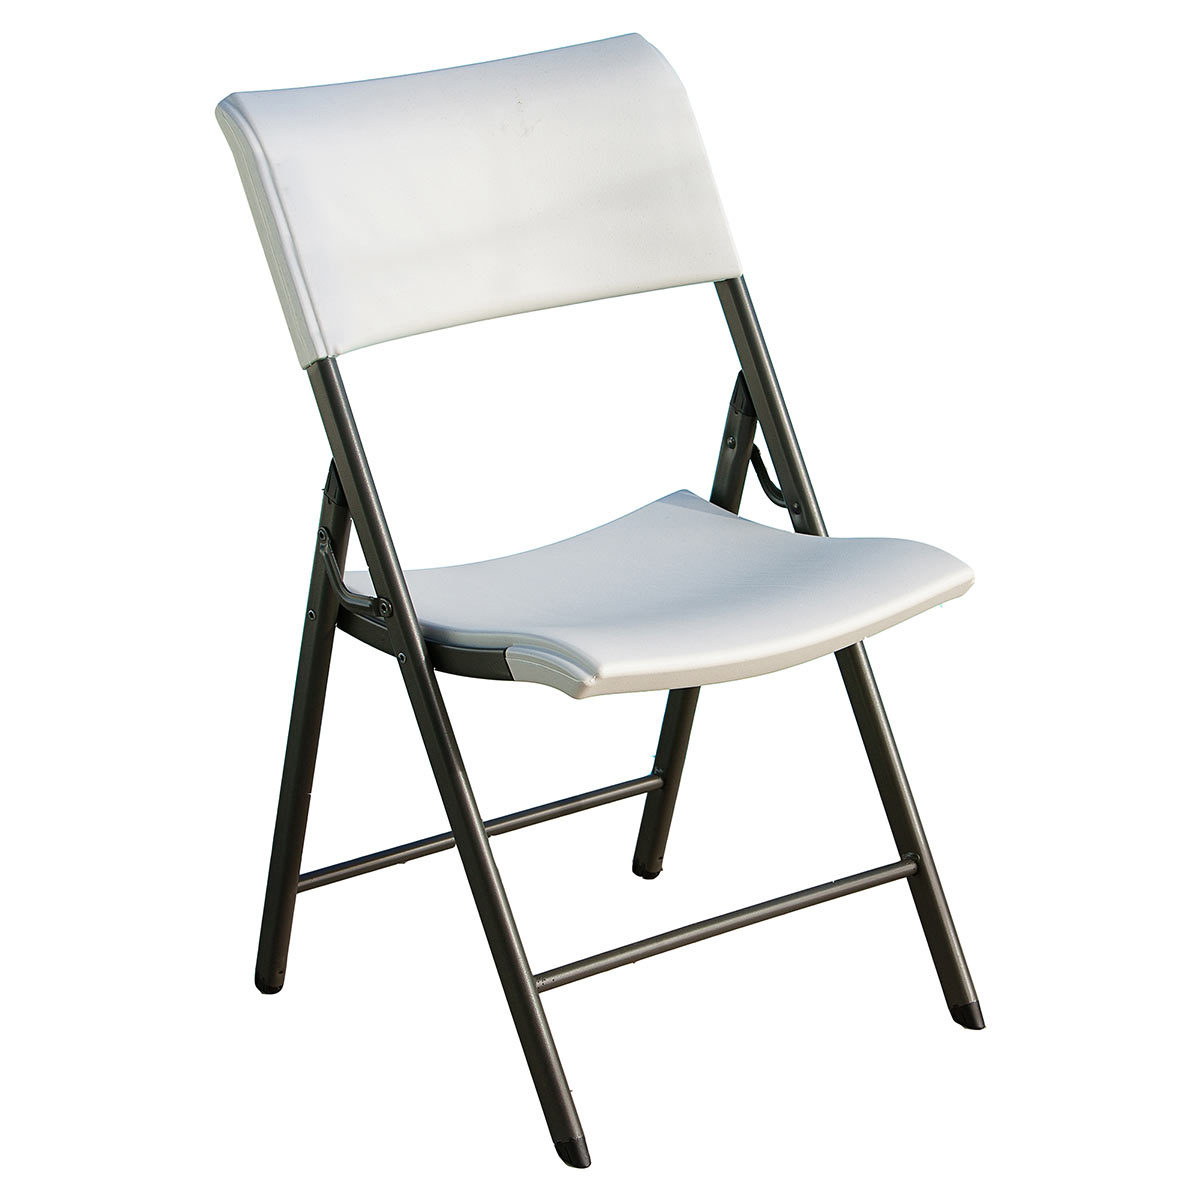 Lifetime Folding Chair - 32 Pack, with 1 Chair Trolley